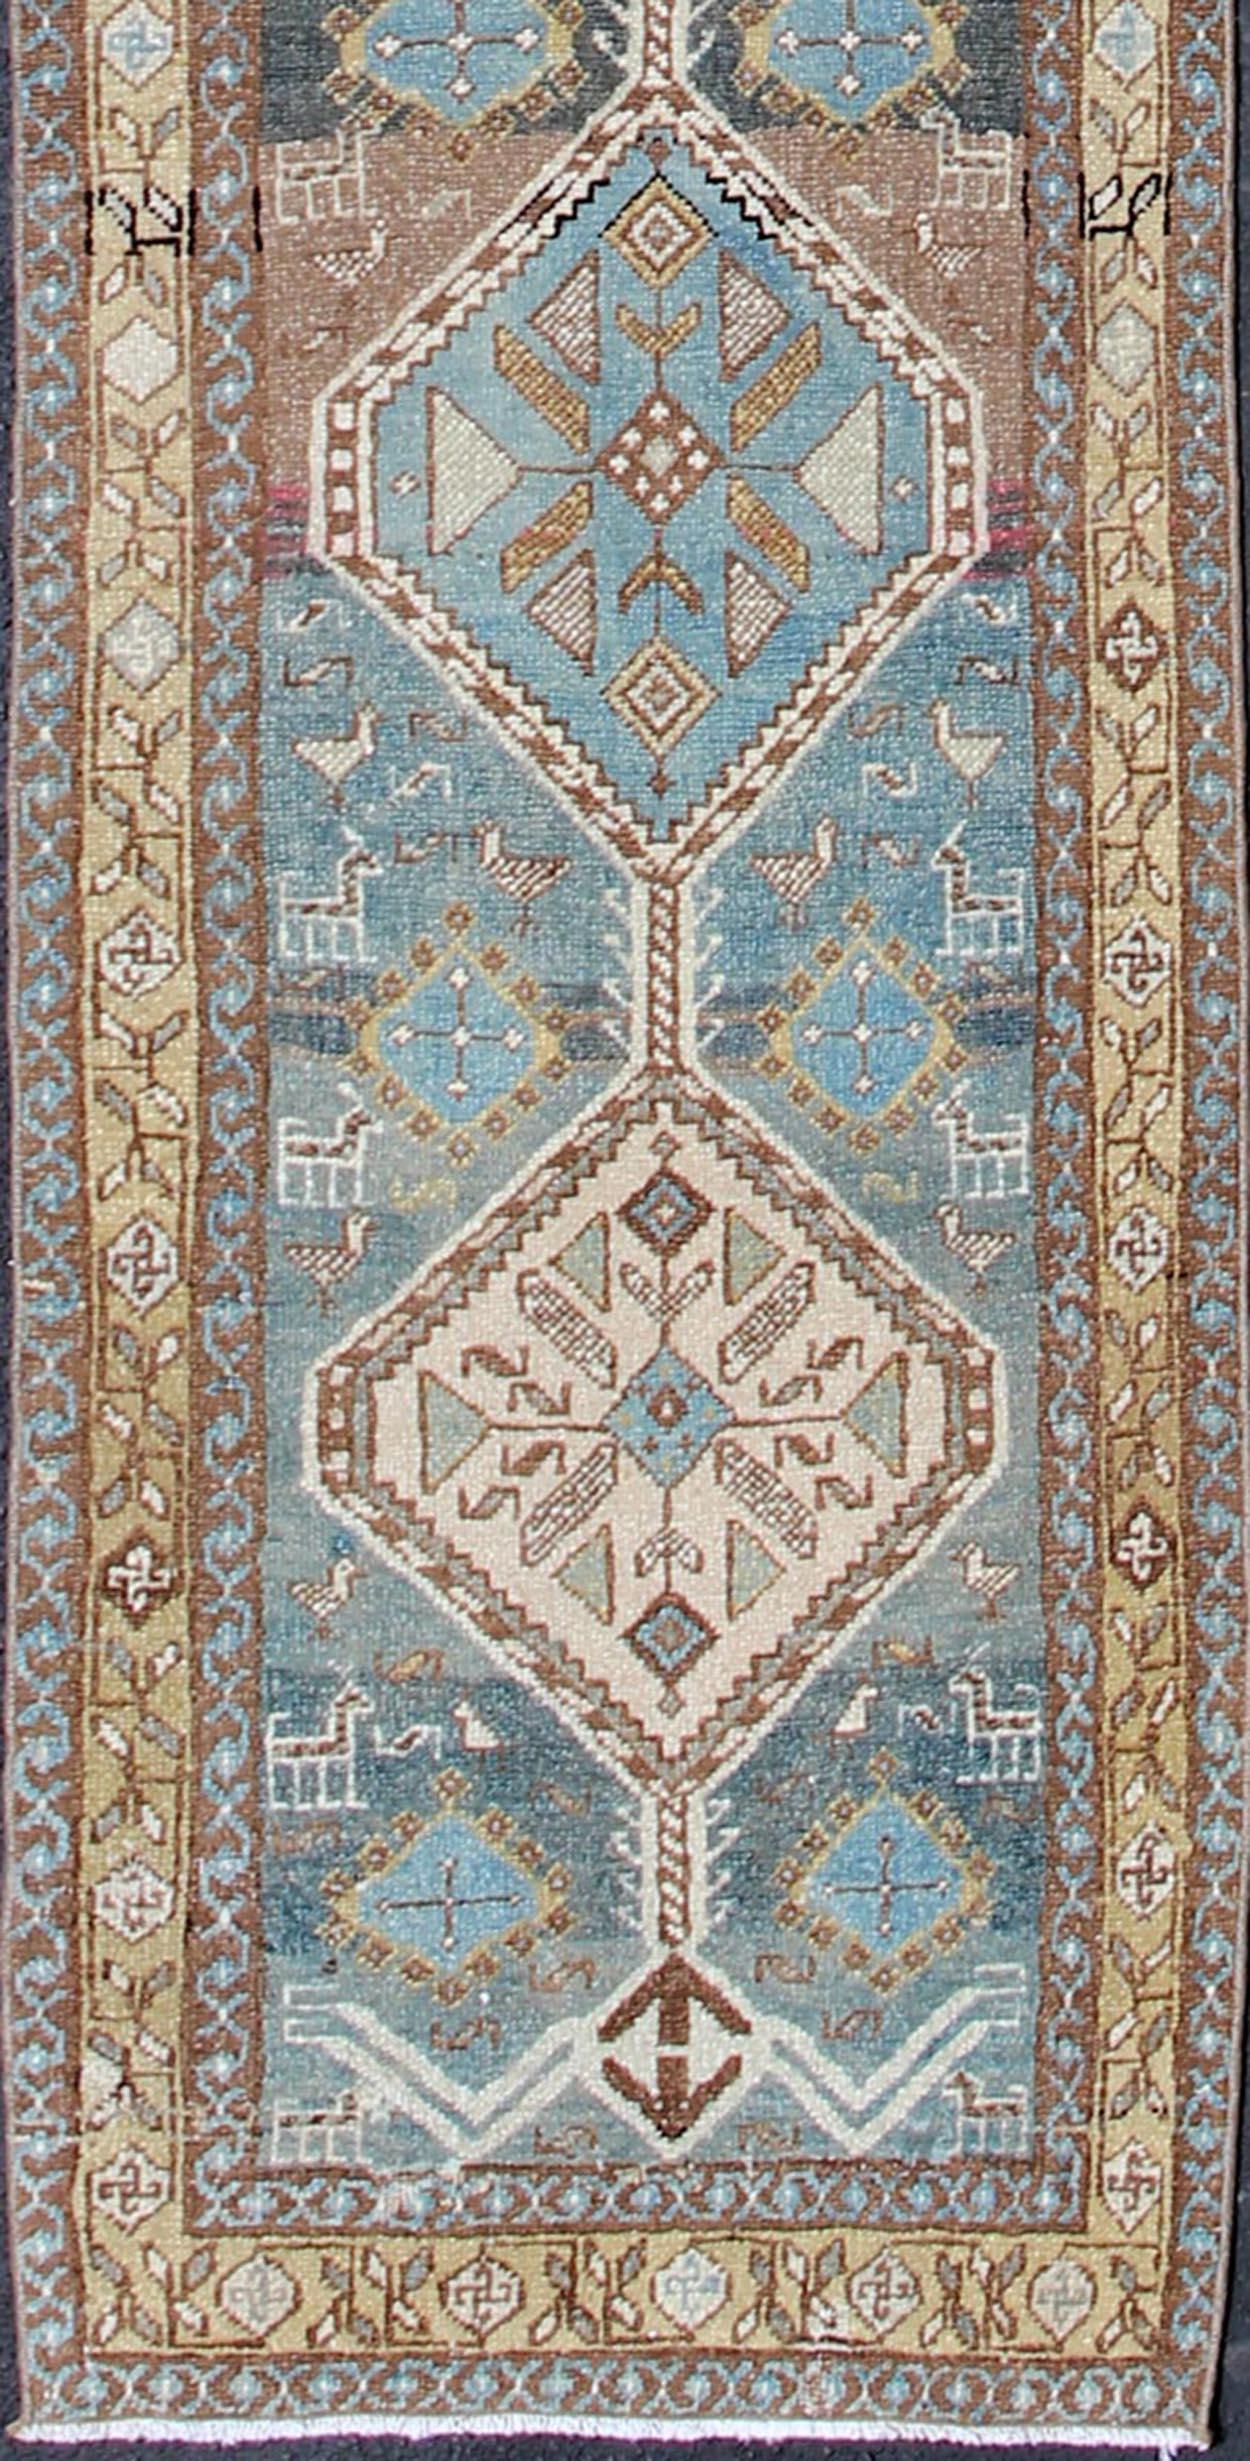 Persian Heriz antique Gallery rug with sub-geometric Medallion Design in colorful tones including blue, nude, and brown, rug sus-1807-215, country of origin / type: Iran / Heriz, circa 1920

This antique Persian Heriz runner, from northwest Iran,